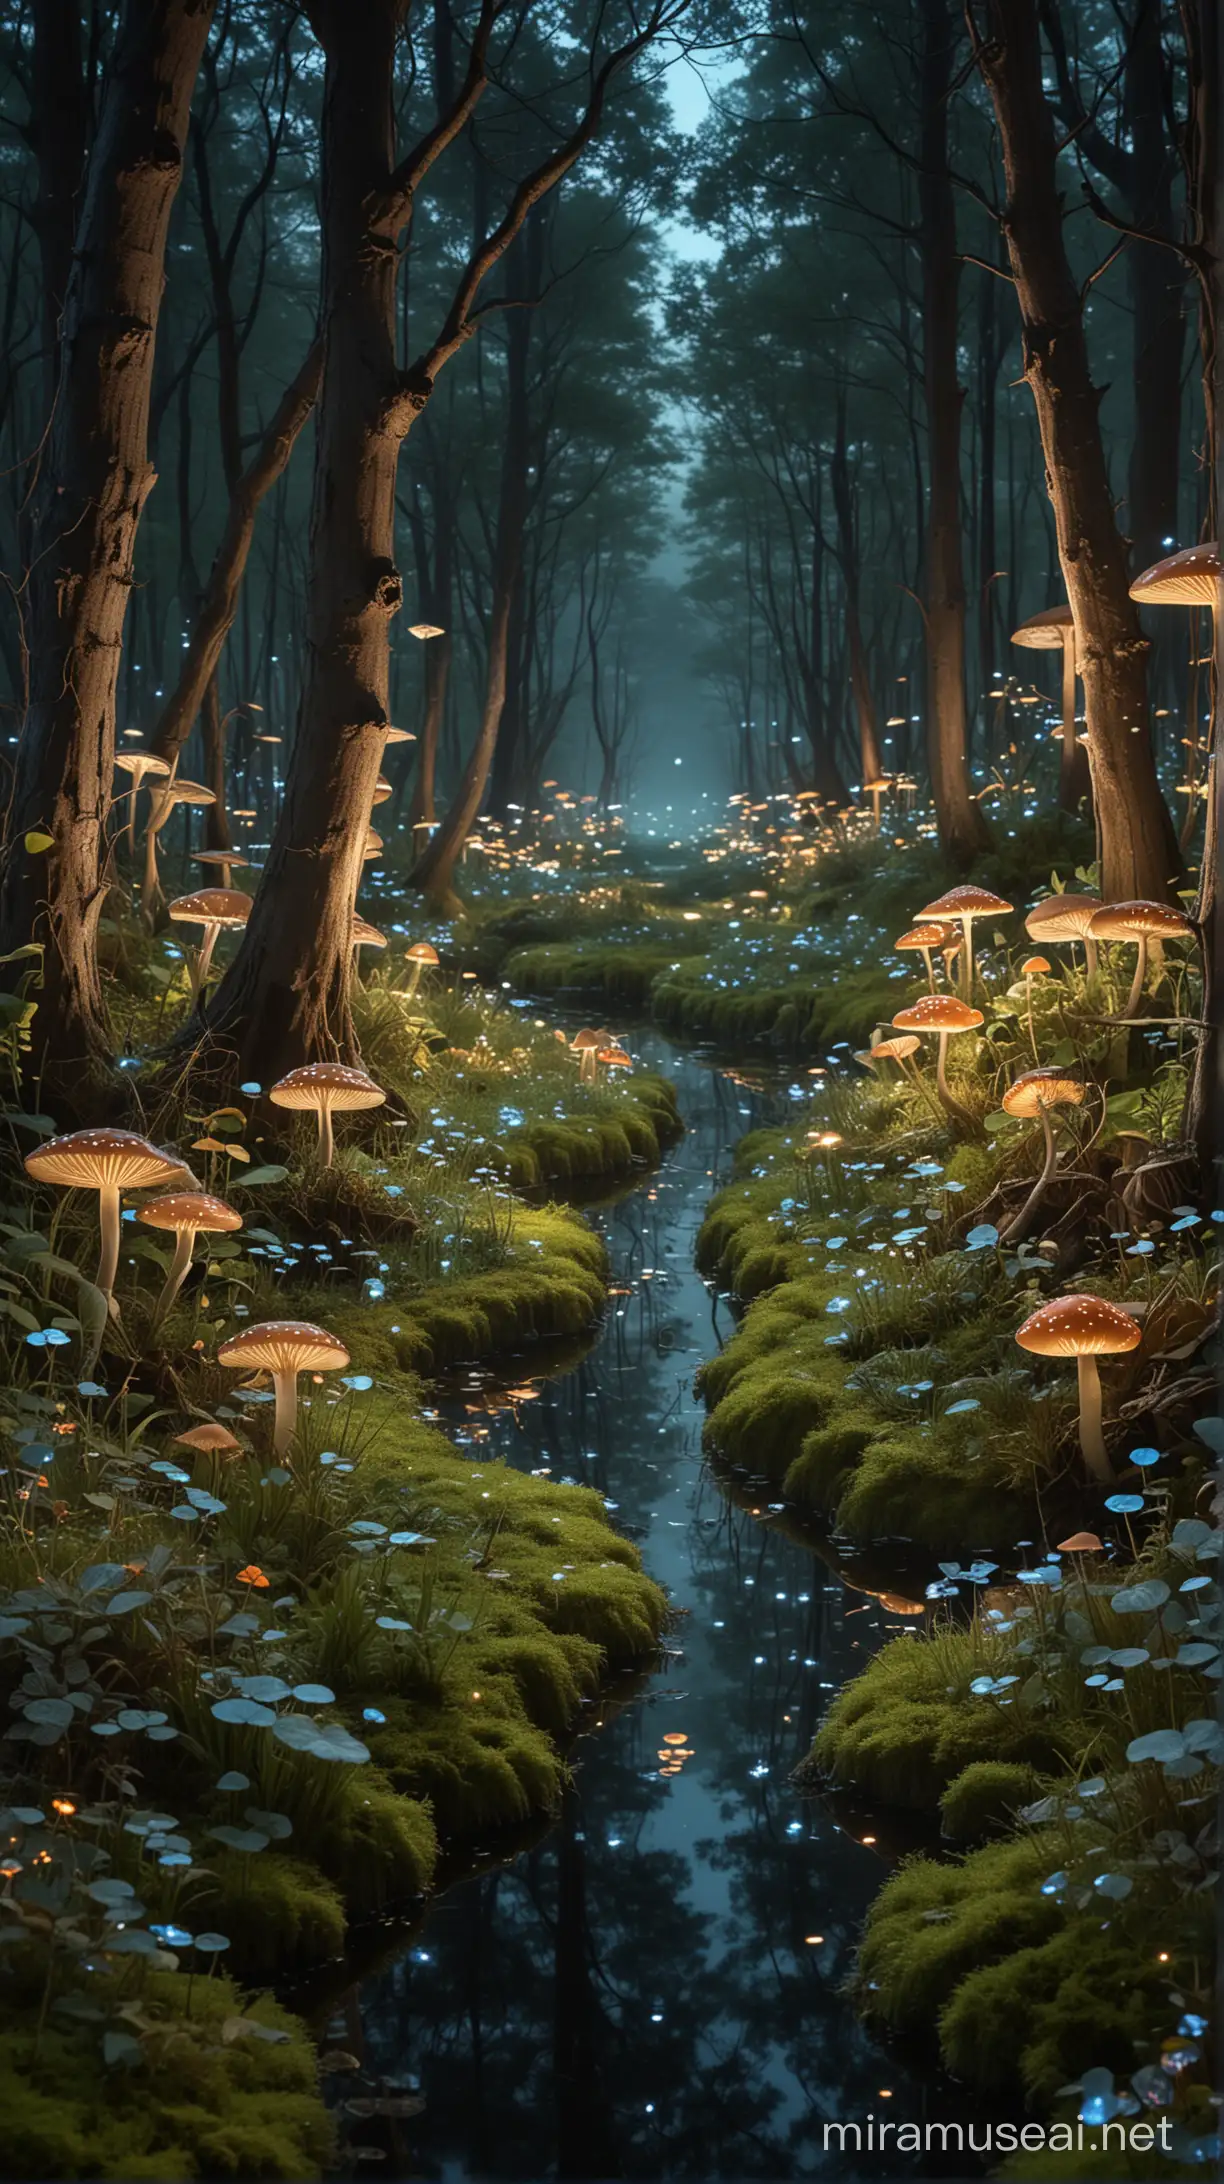 Enchanted Bioluminescent Forest at Night with Glowing Flora and Fauna